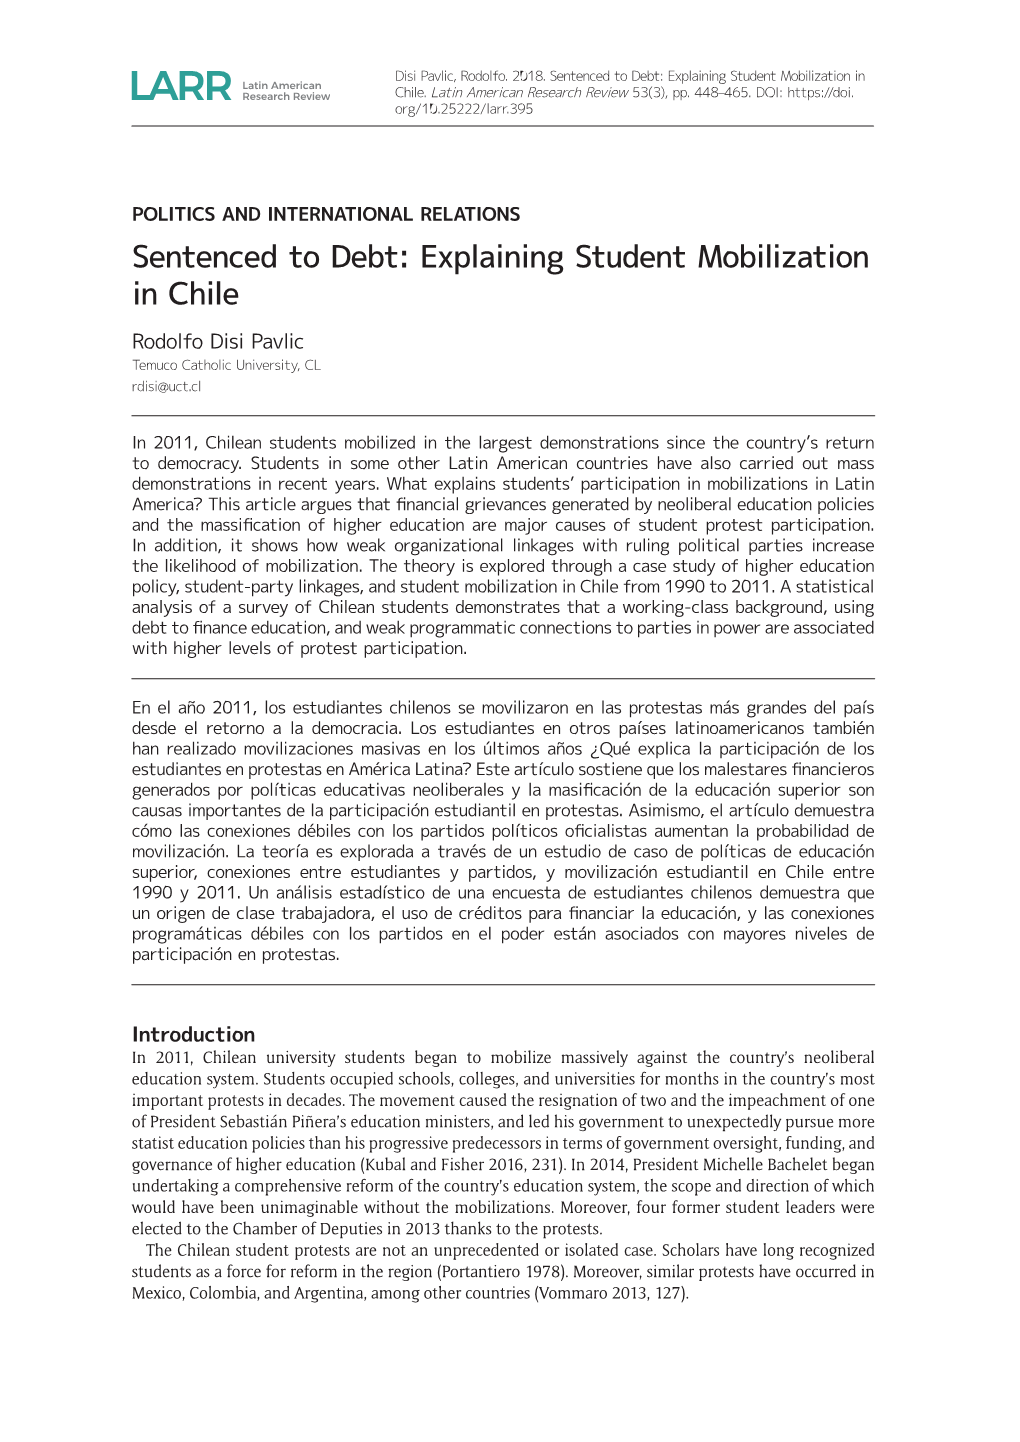 Sentenced to Debt: Explaining Student Mobilization in Chile